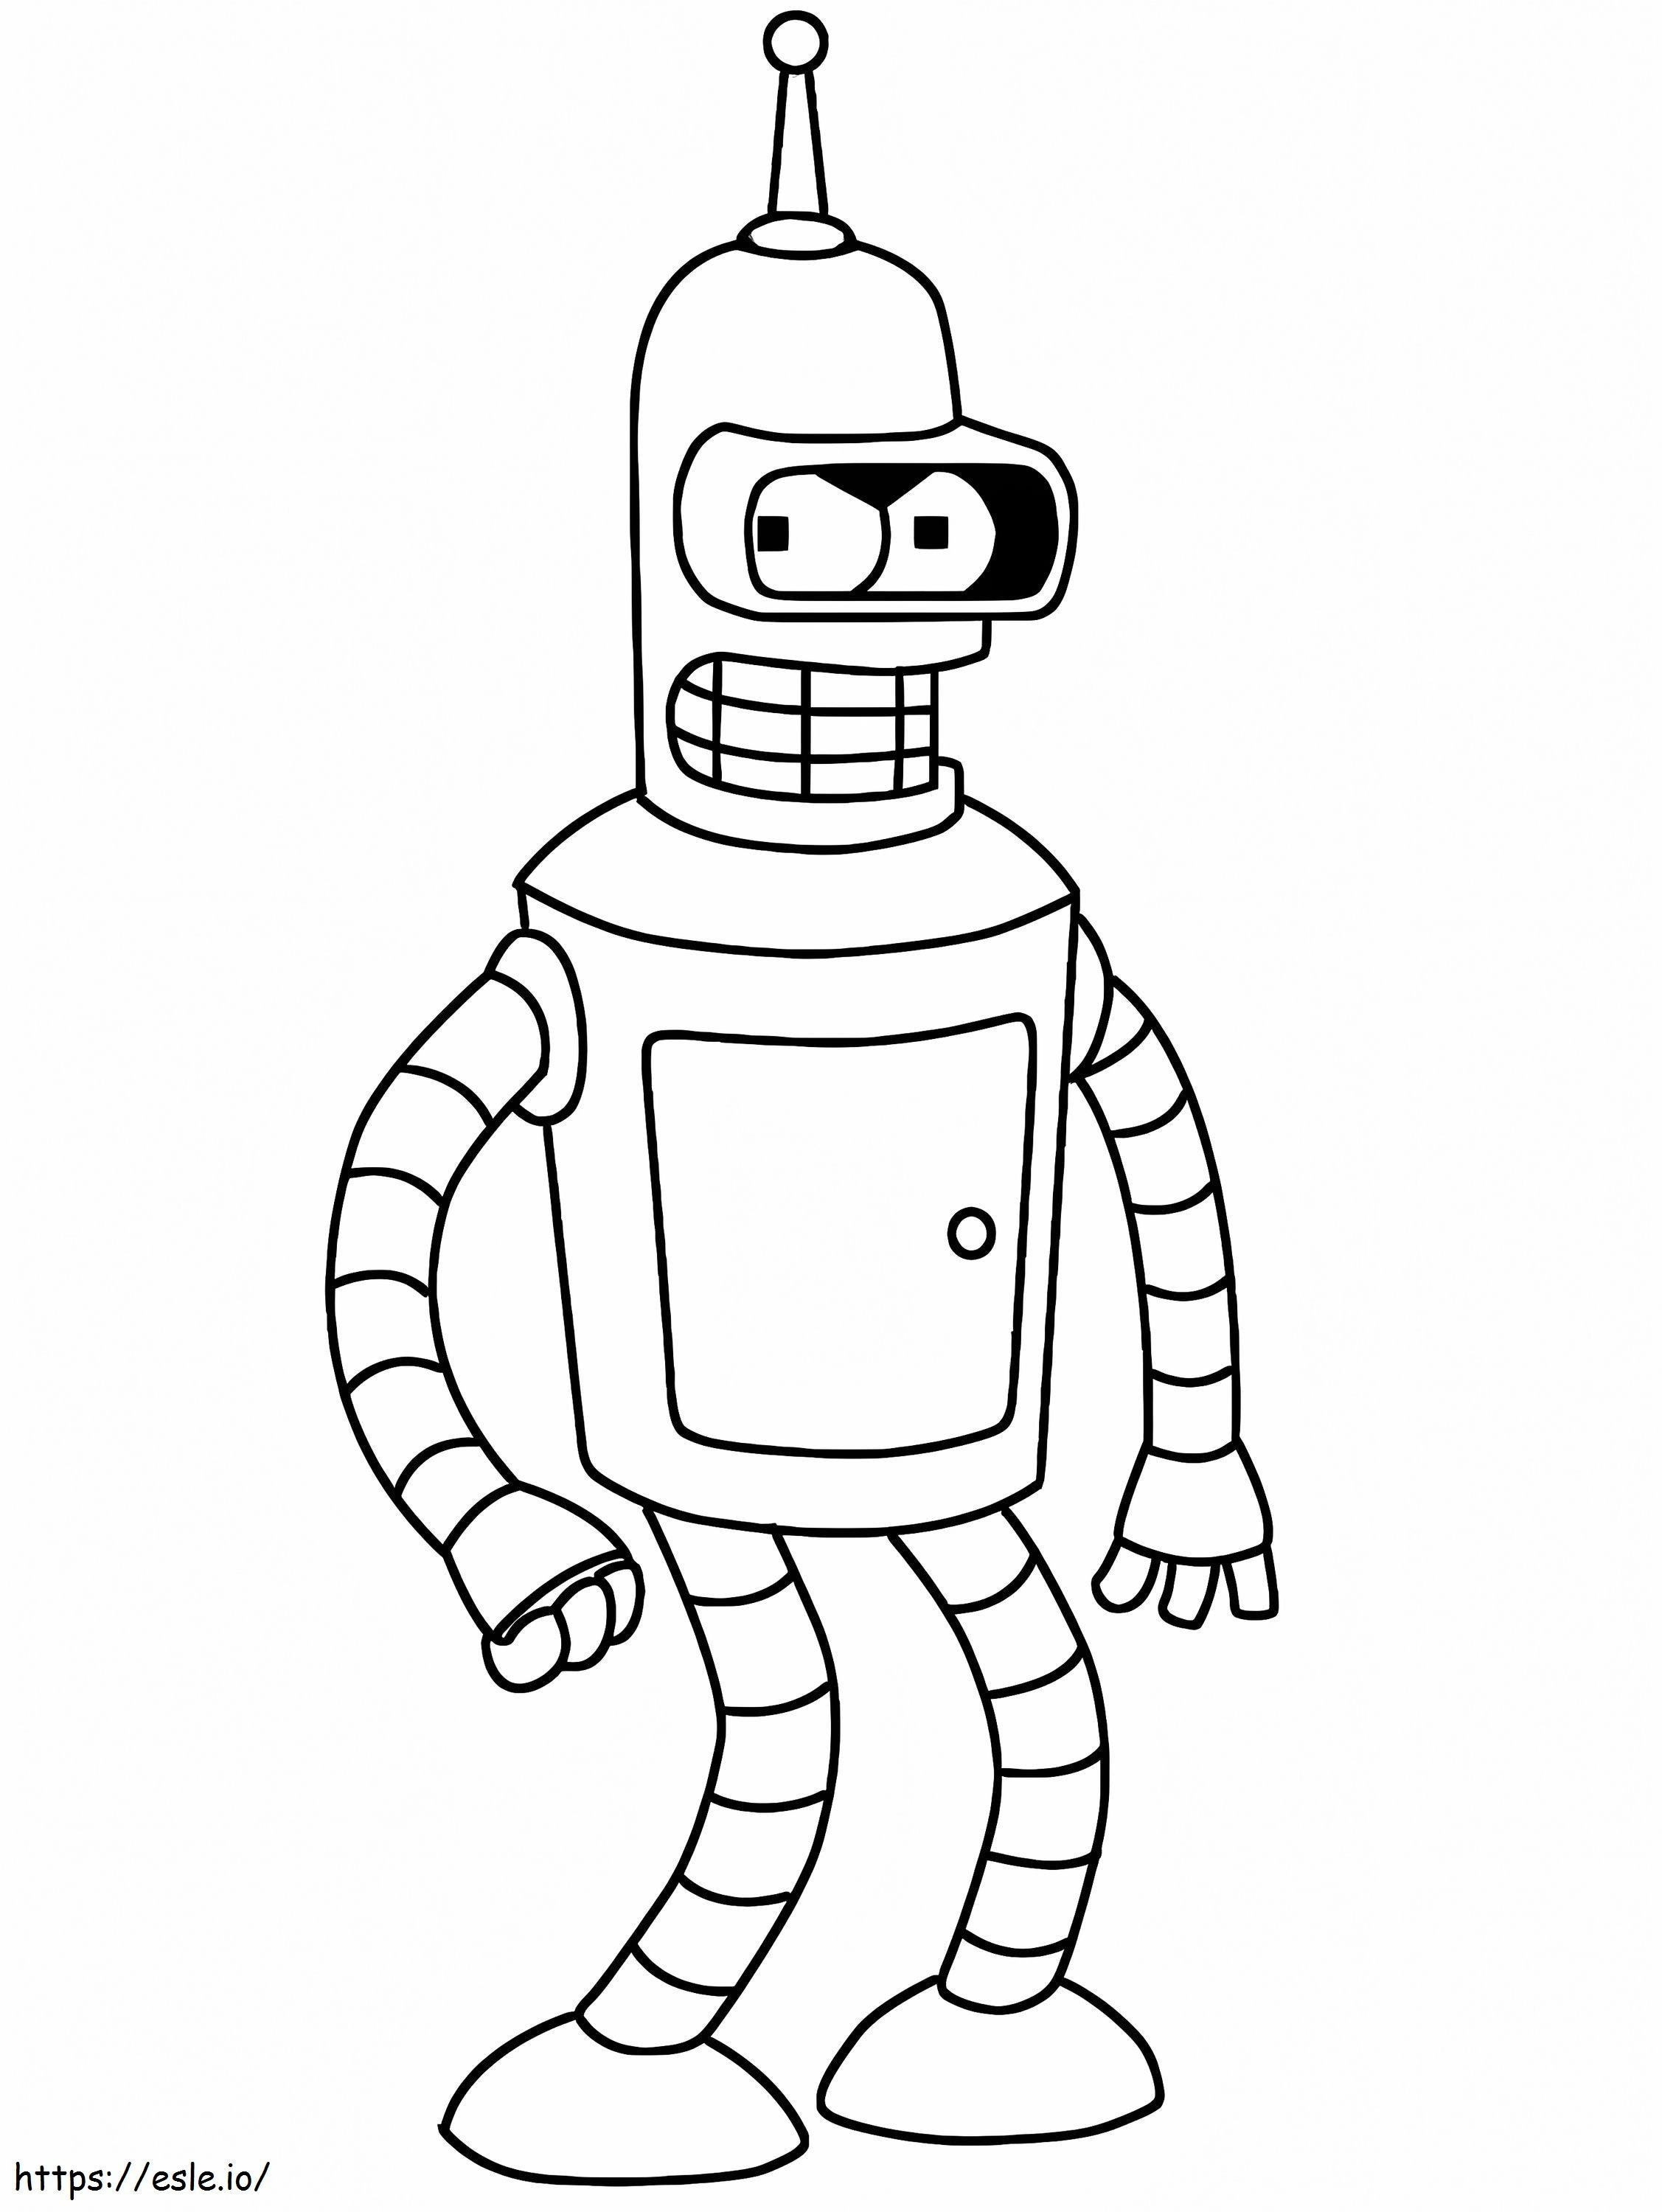 Bender 2 coloring page